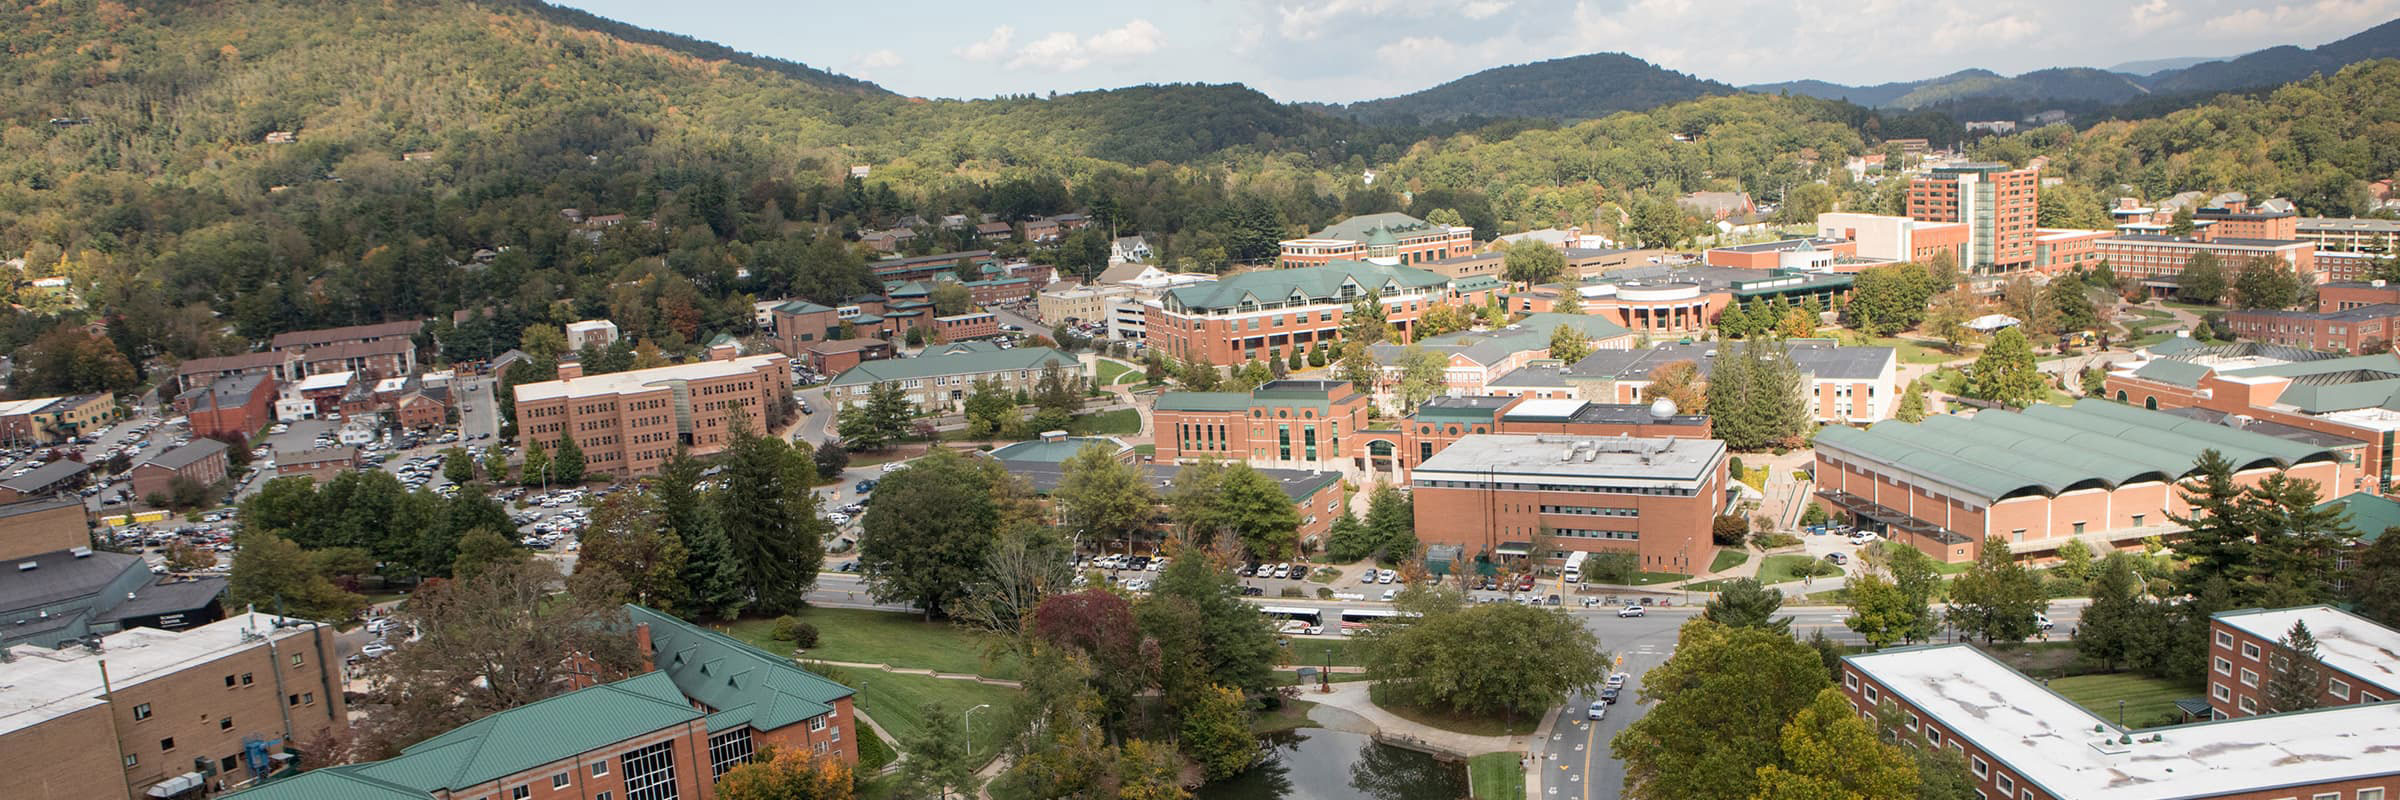 Drone View of App State Campus